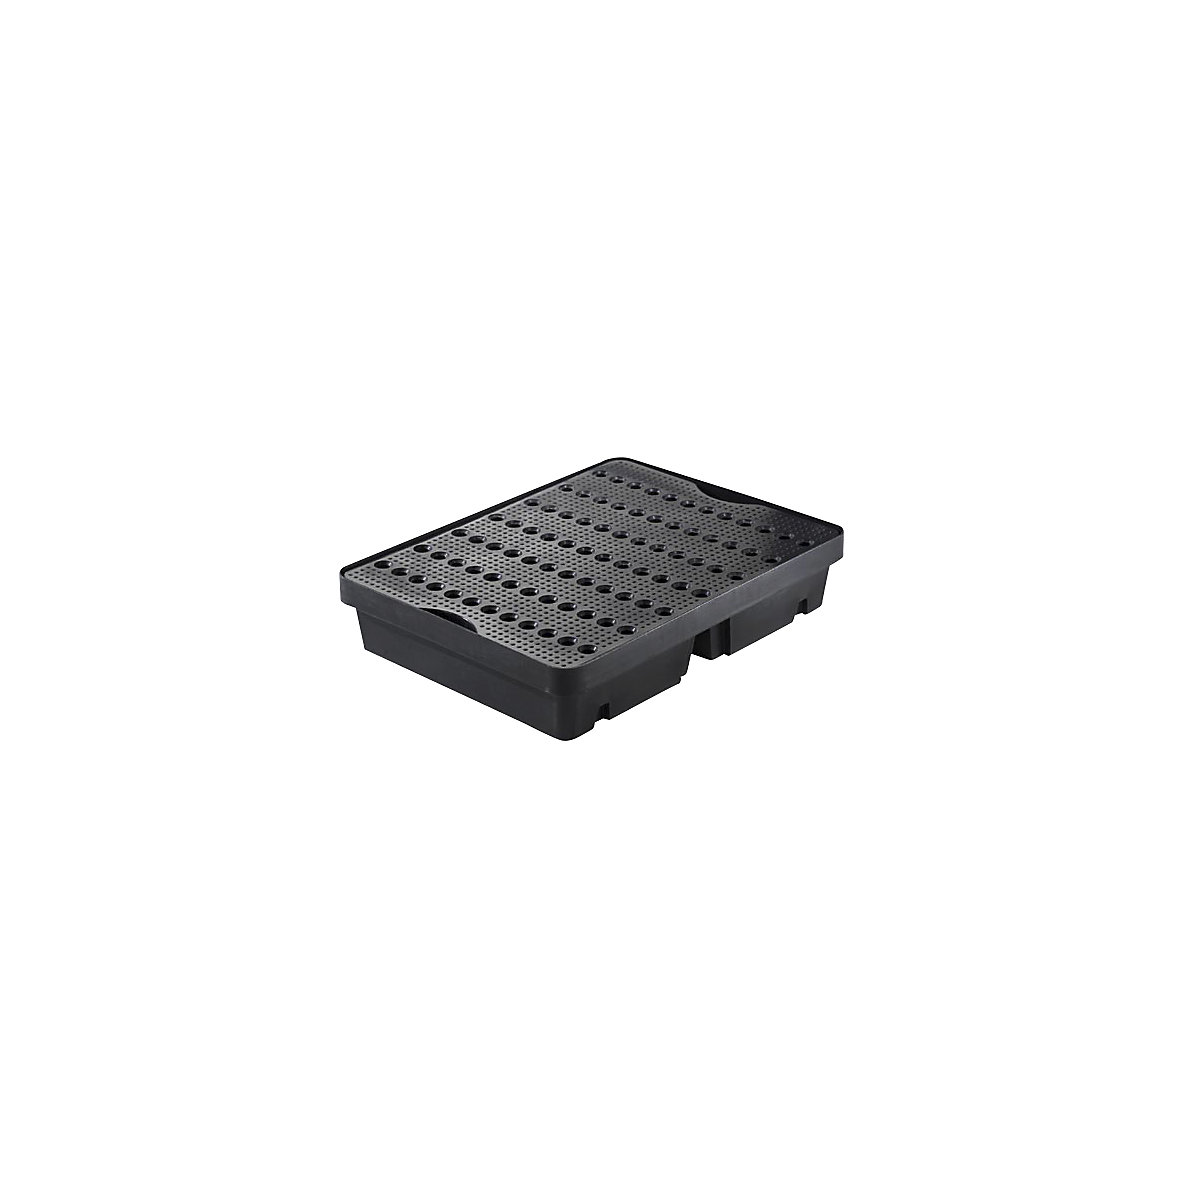 Small container pallet tray, made of polyethylene (LDPE), capacity 40 l, with PE grate-10